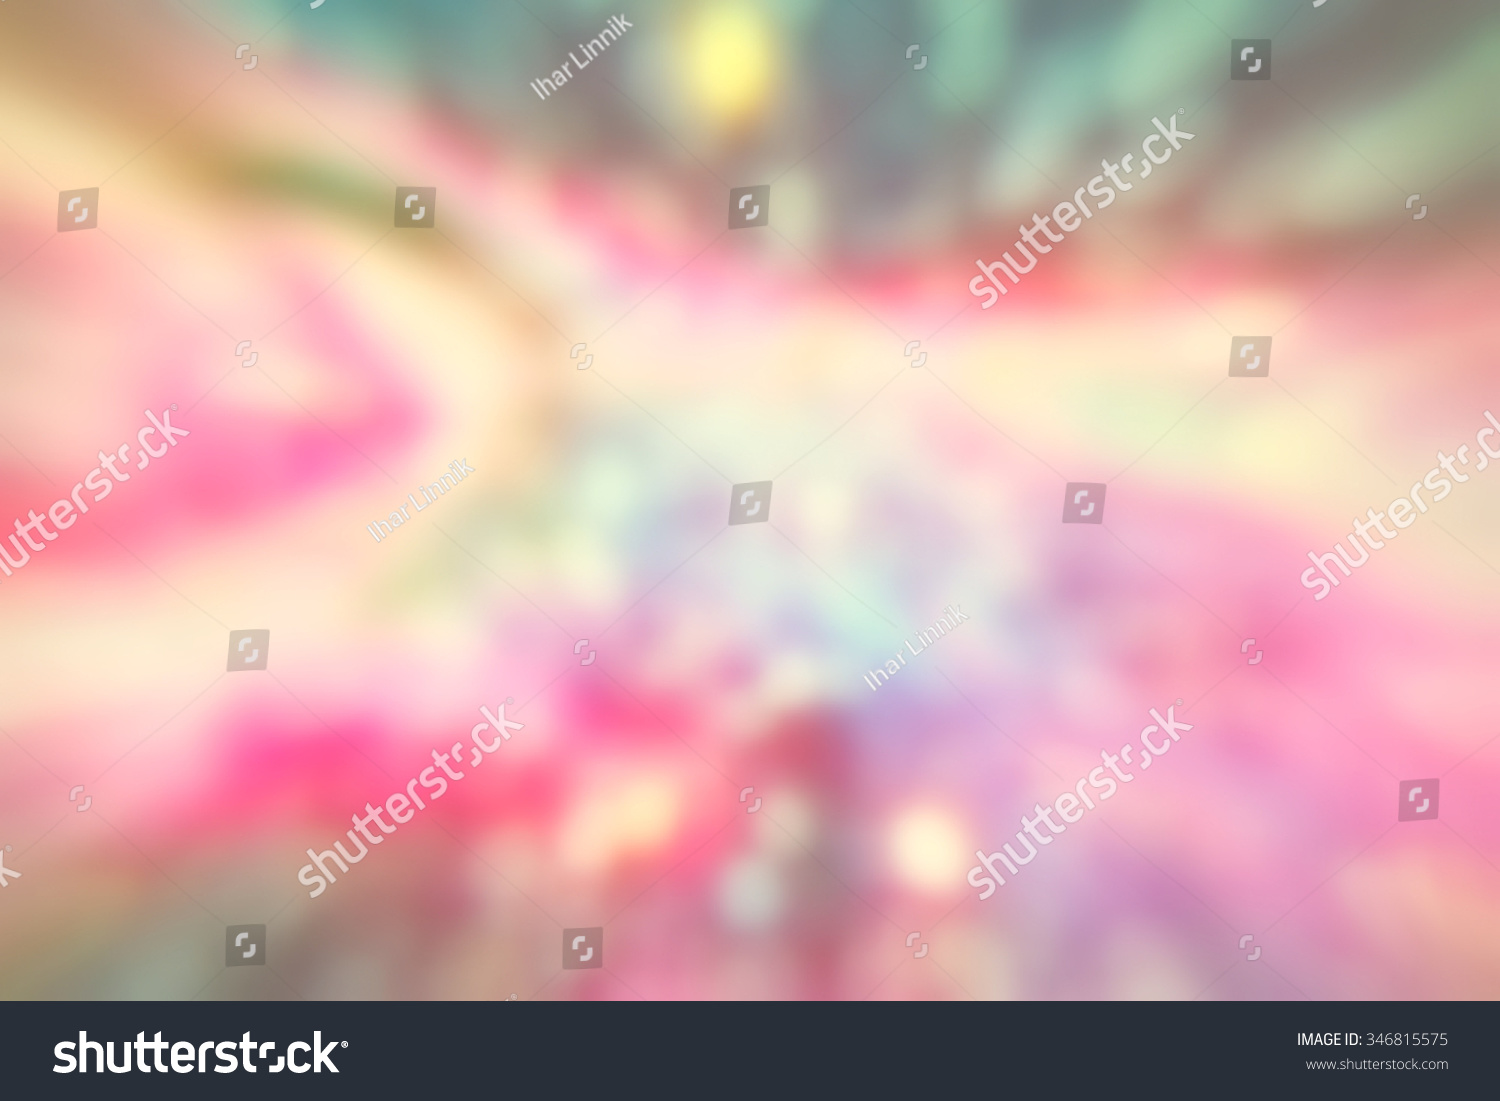 Soft light, colorful background, romantic abstract #346815575